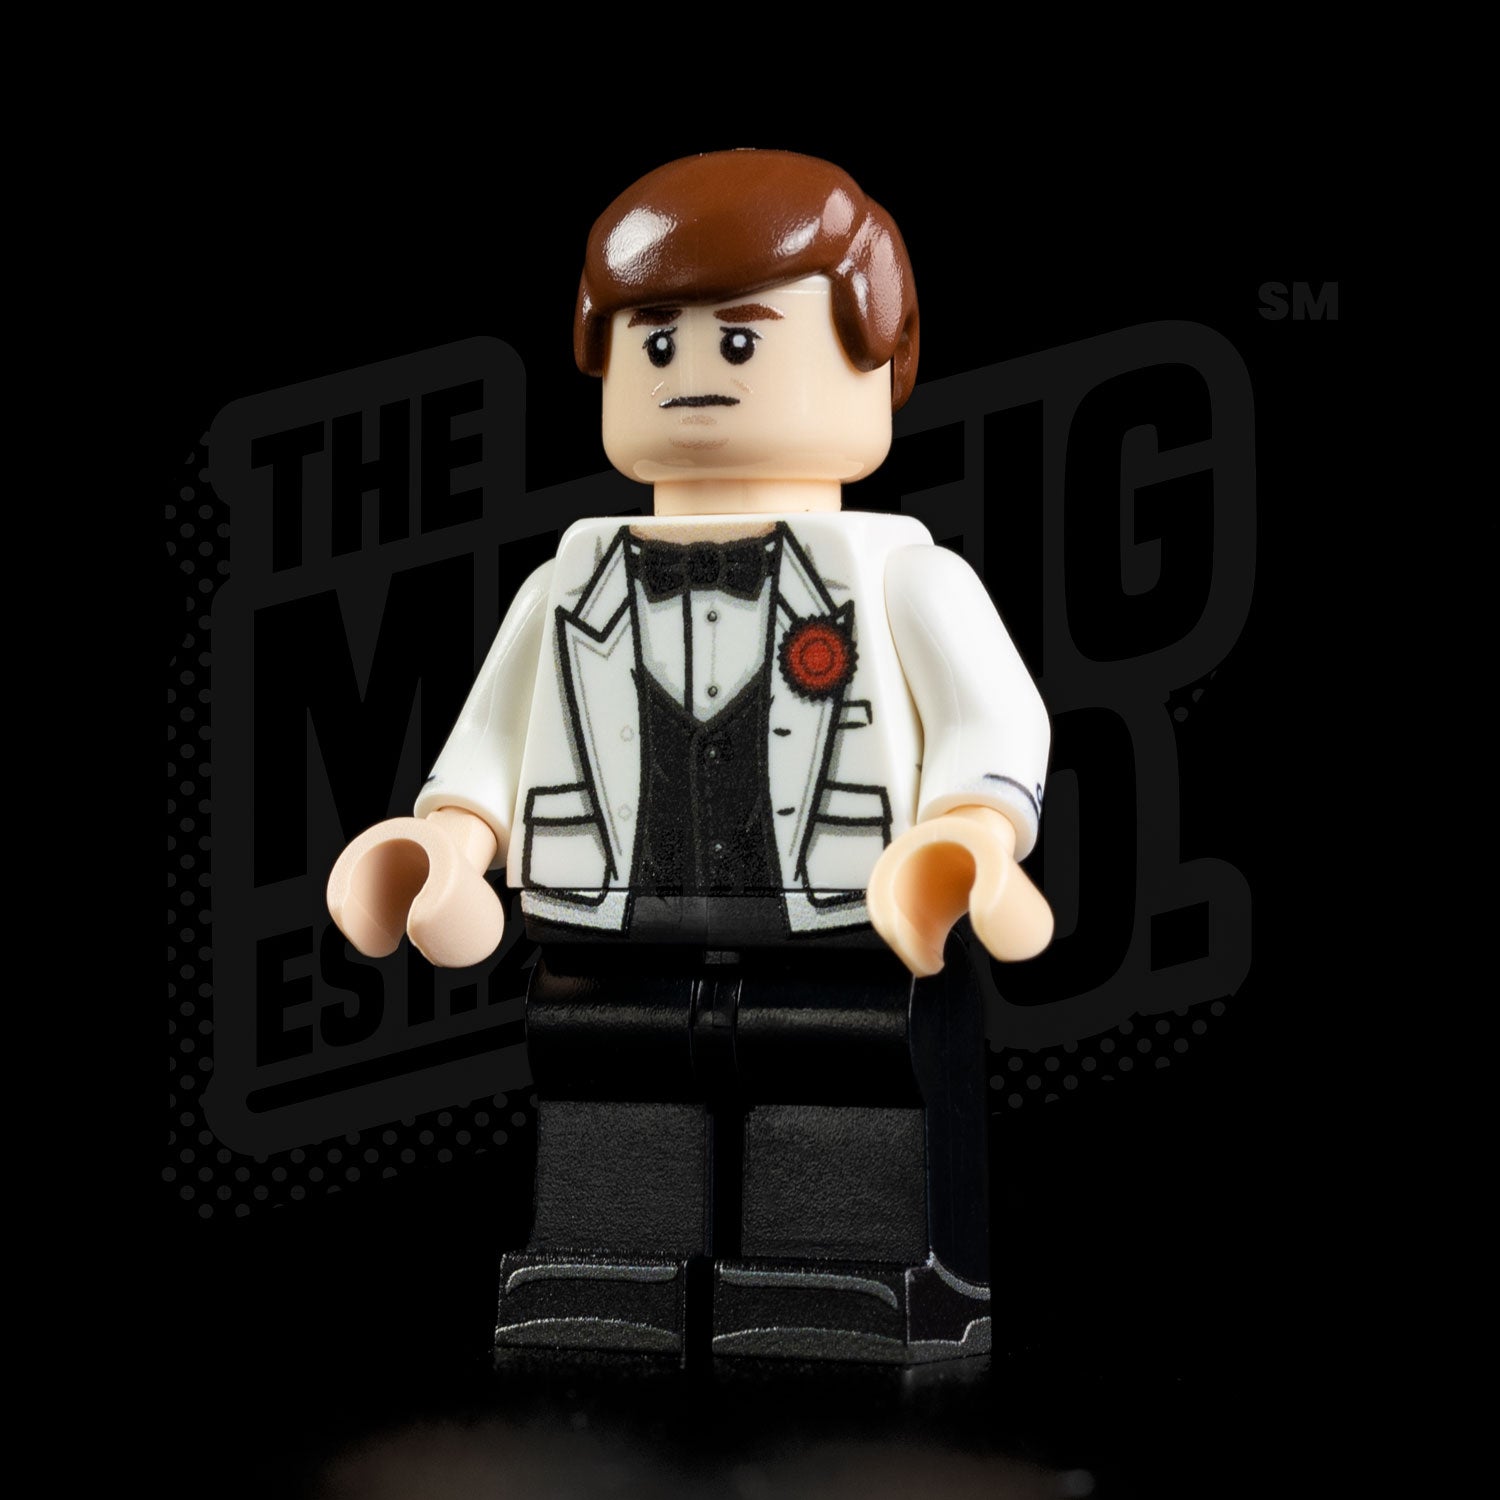 Diamond Hunting Archaeologist - The Minifig Co.